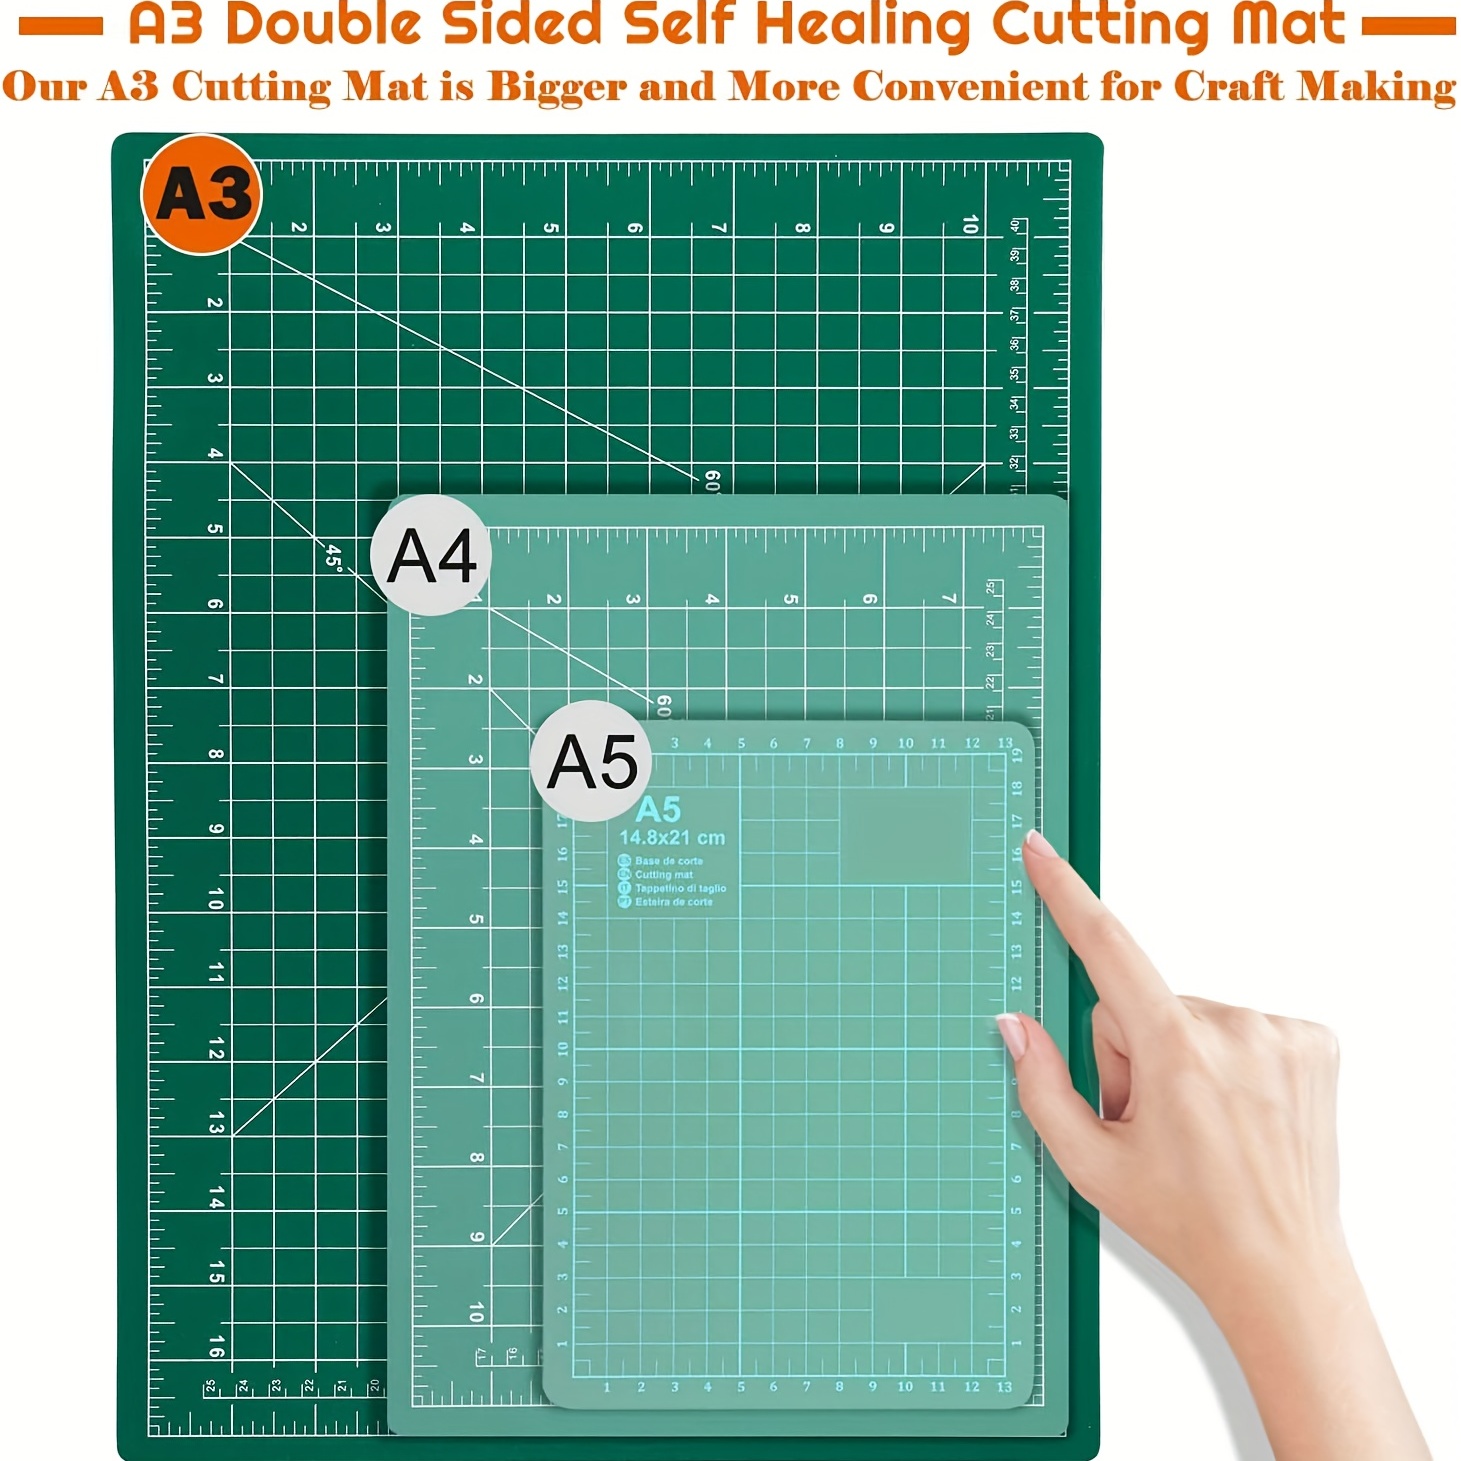 Ecraft Self Healing Cutting Mat: Double Sided 5-Ply Fabric Cutting Mat for Sewing, Quilting, Scrapbooking and All Arts &Craft Projects Gridded Rotary